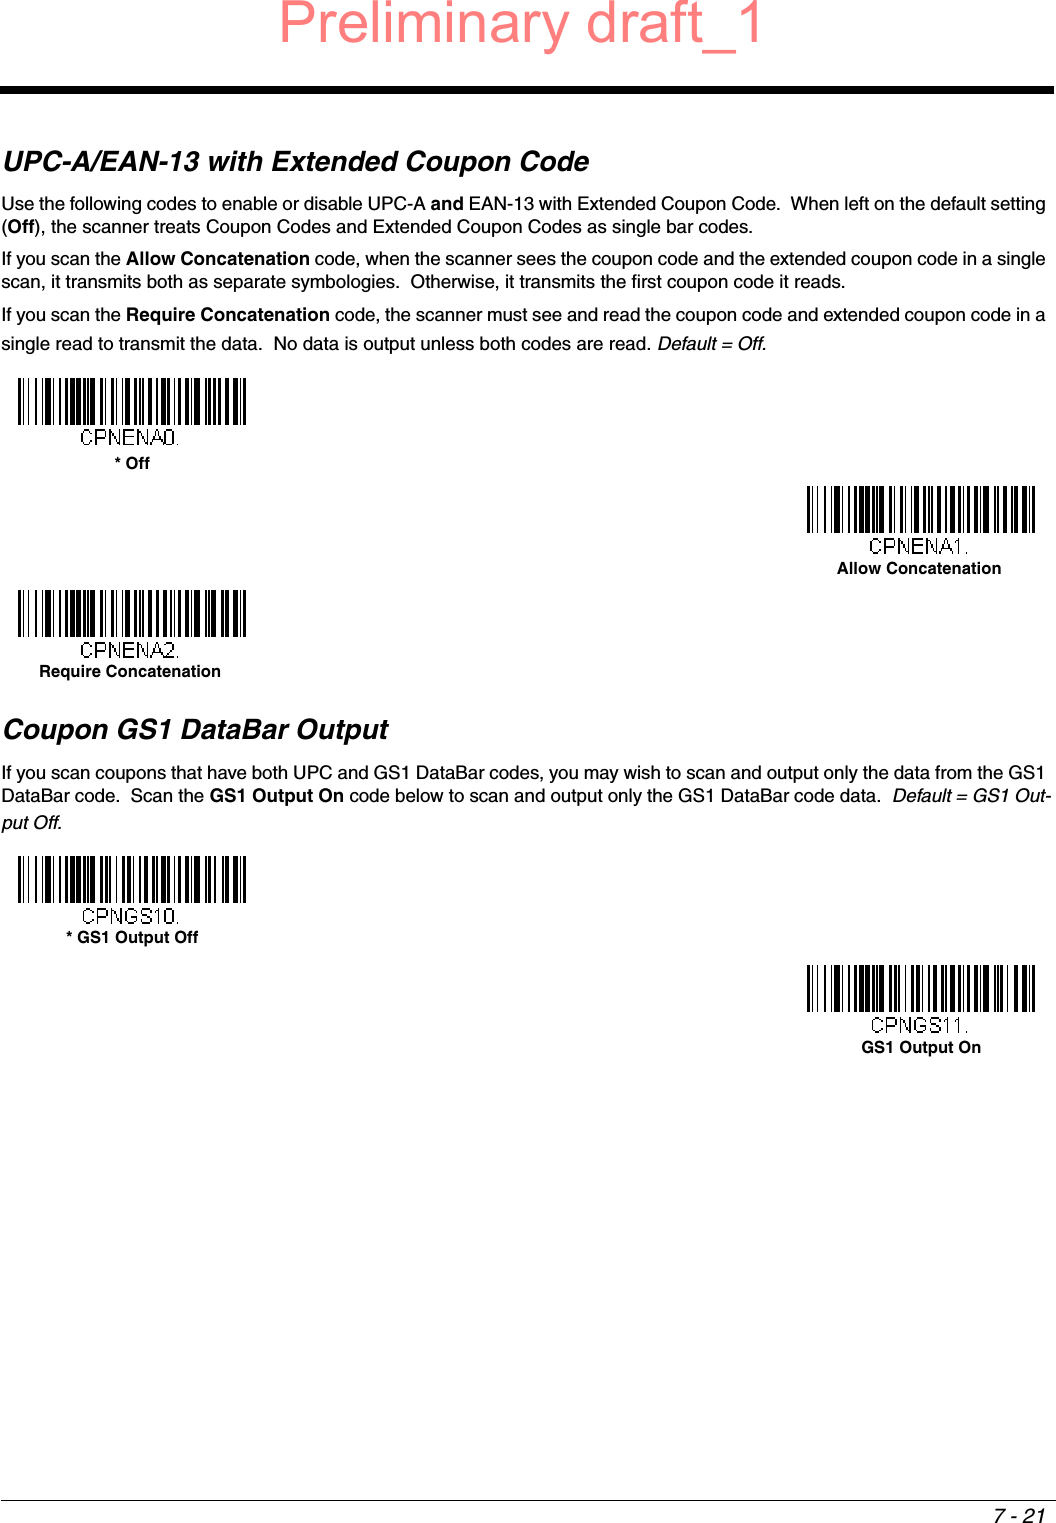 7 - 21UPC-A/EAN-13 with Extended Coupon CodeUse the following codes to enable or disable UPC-A and EAN-13 with Extended Coupon Code.  When left on the default setting (Off), the scanner treats Coupon Codes and Extended Coupon Codes as single bar codes.  If you scan the Allow Concatenation code, when the scanner sees the coupon code and the extended coupon code in a single scan, it transmits both as separate symbologies.  Otherwise, it transmits the first coupon code it reads.  If you scan the Require Concatenation code, the scanner must see and read the coupon code and extended coupon code in a single read to transmit the data.  No data is output unless both codes are read. Default = Off.Coupon GS1 DataBar OutputIf you scan coupons that have both UPC and GS1 DataBar codes, you may wish to scan and output only the data from the GS1 DataBar code.  Scan the GS1 Output On code below to scan and output only the GS1 DataBar code data.  Default = GS1 Out-put Off.* OffAllow ConcatenationRequire Concatenation* GS1 Output OffGS1 Output OnPreliminary draft_1